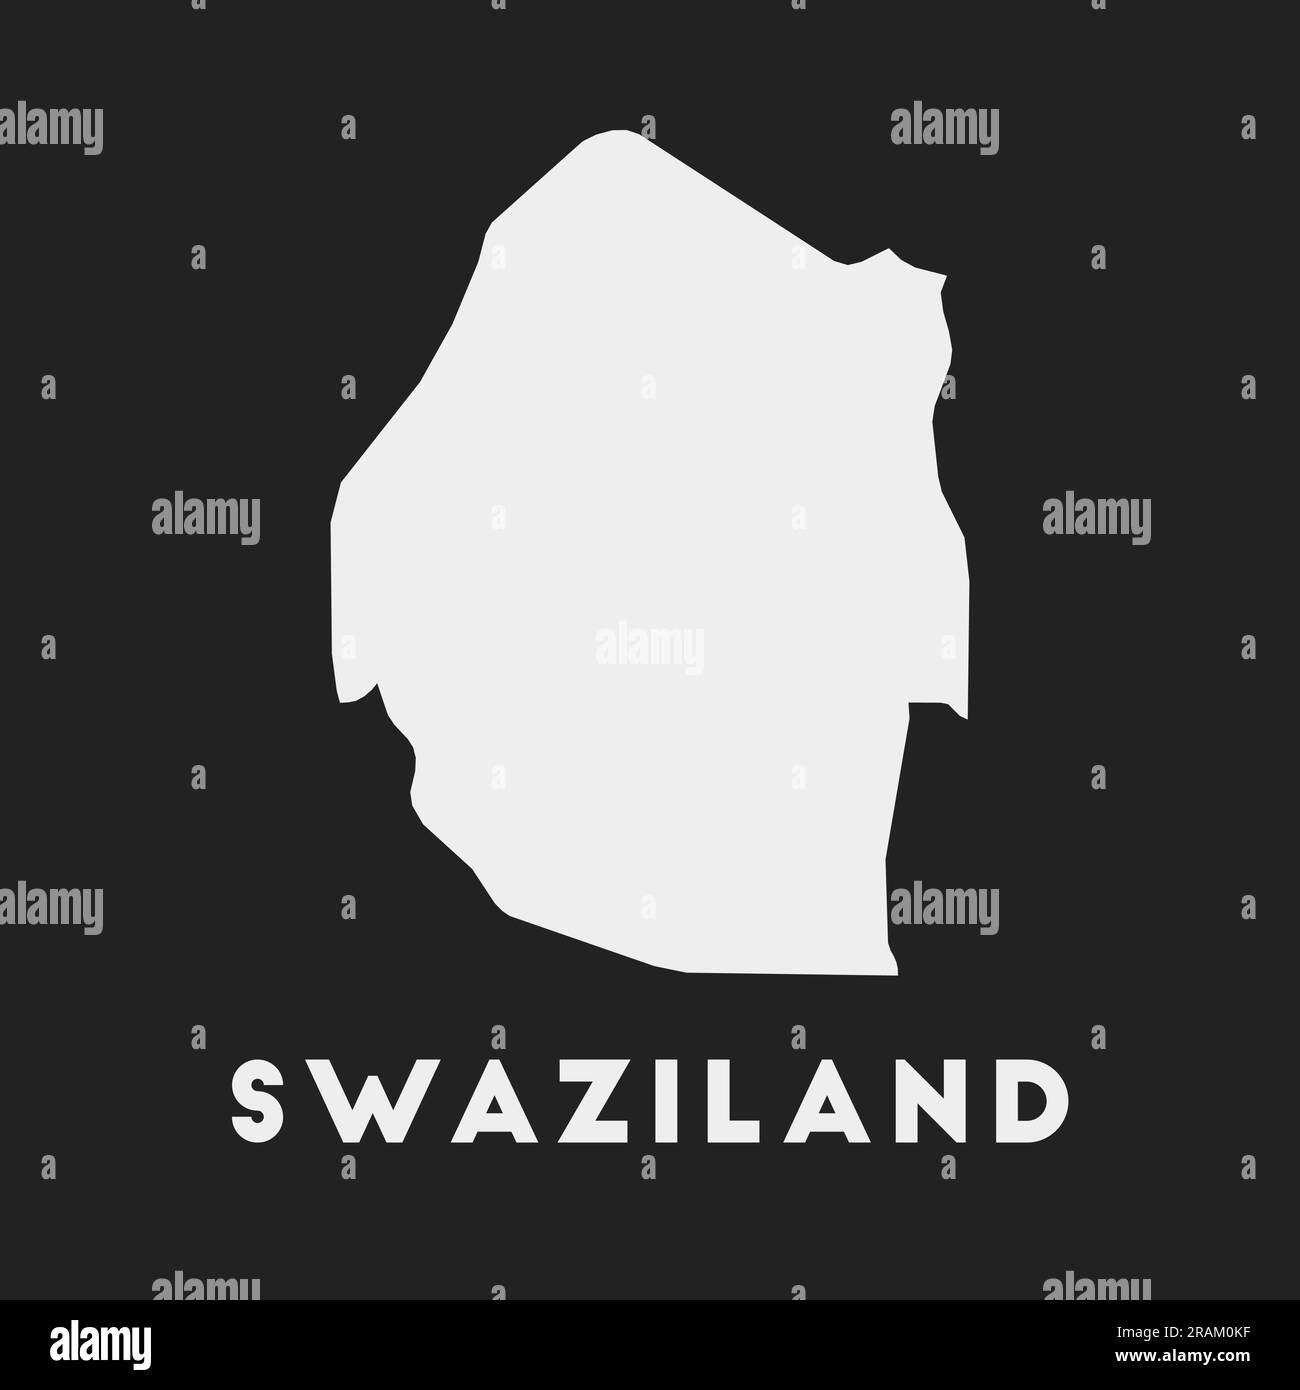 Swaziland icon. Country map on dark background. Stylish Swaziland map with country name. Vector illustration. Stock Vector